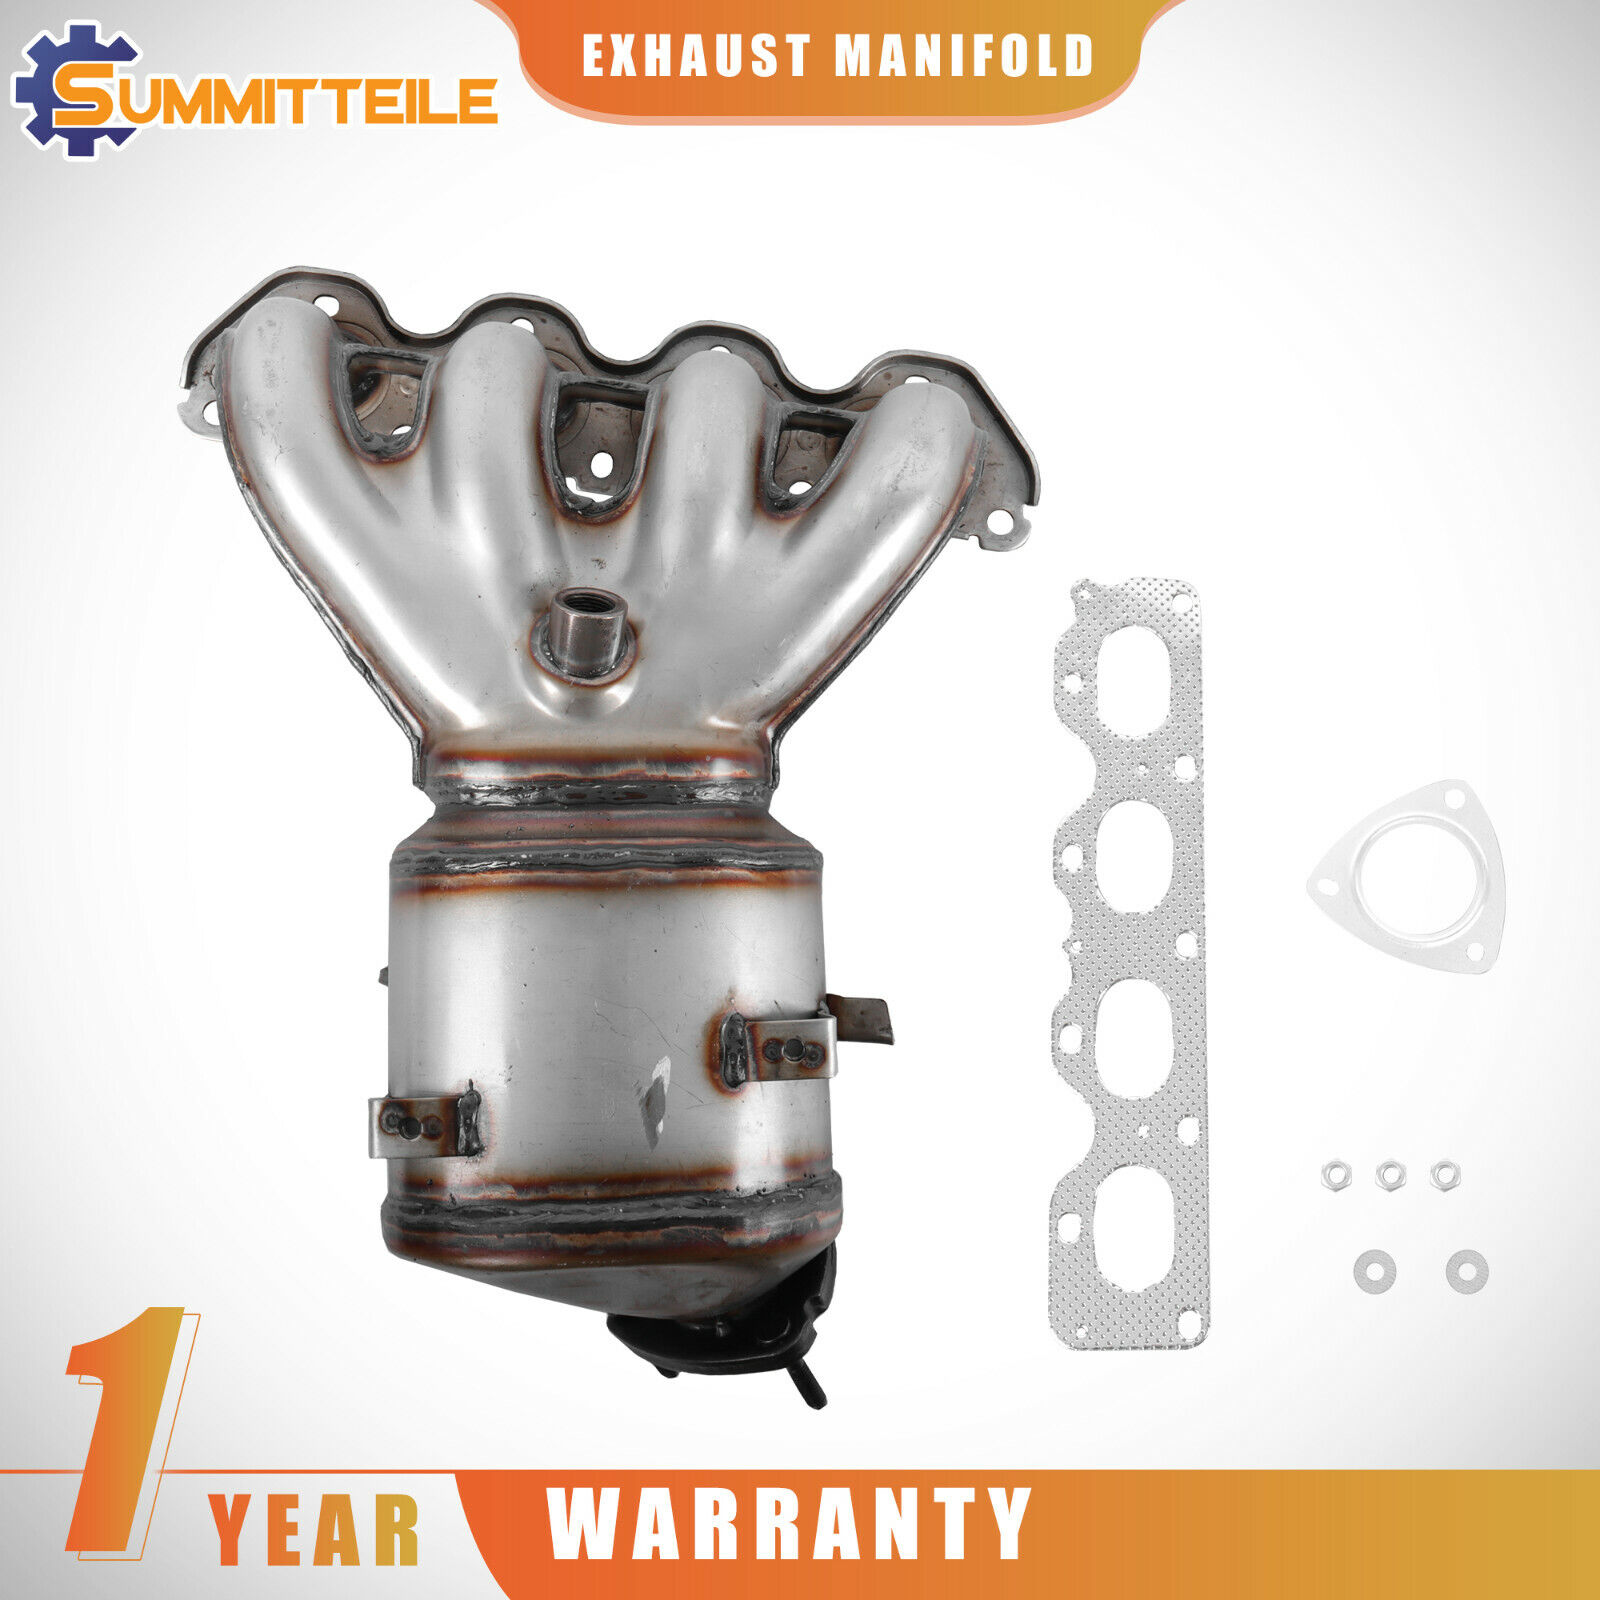 Exhaust Manifold Catalytic Converter 674-841 For 11-16 Chevy Cruze 12-18 Sonic